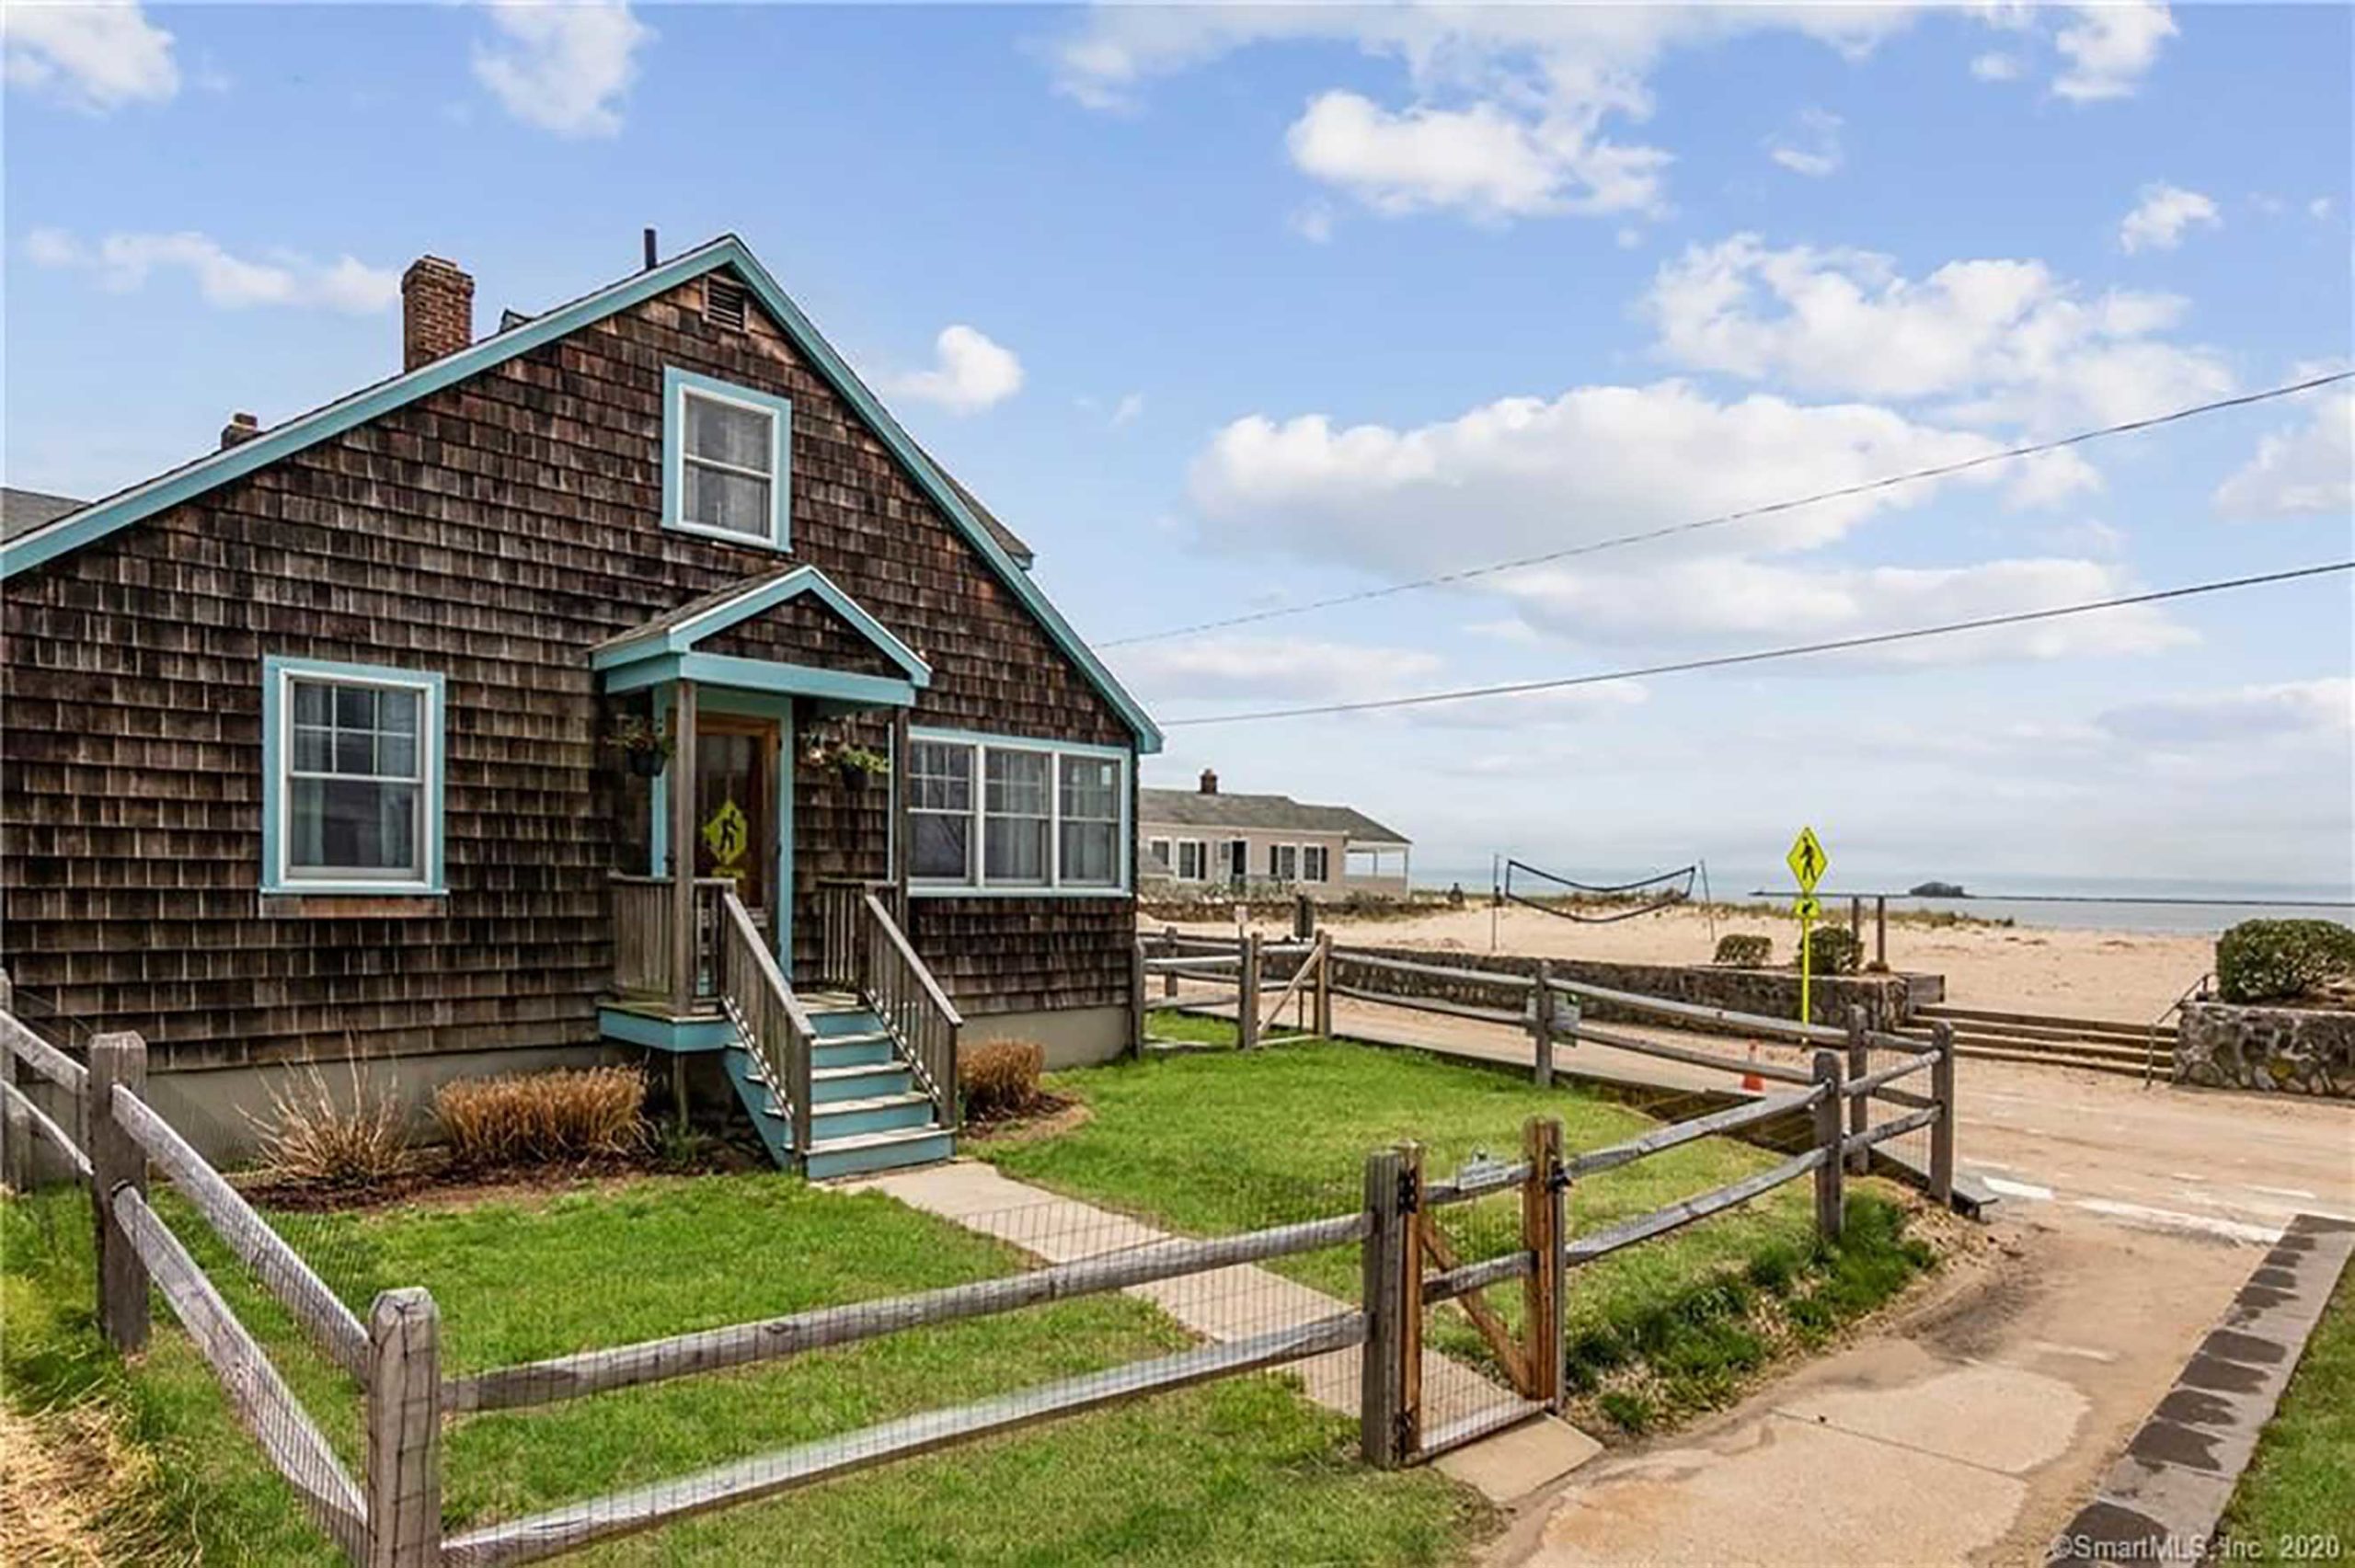 Photograph of a house on the beach in Westbrook, Connecticut